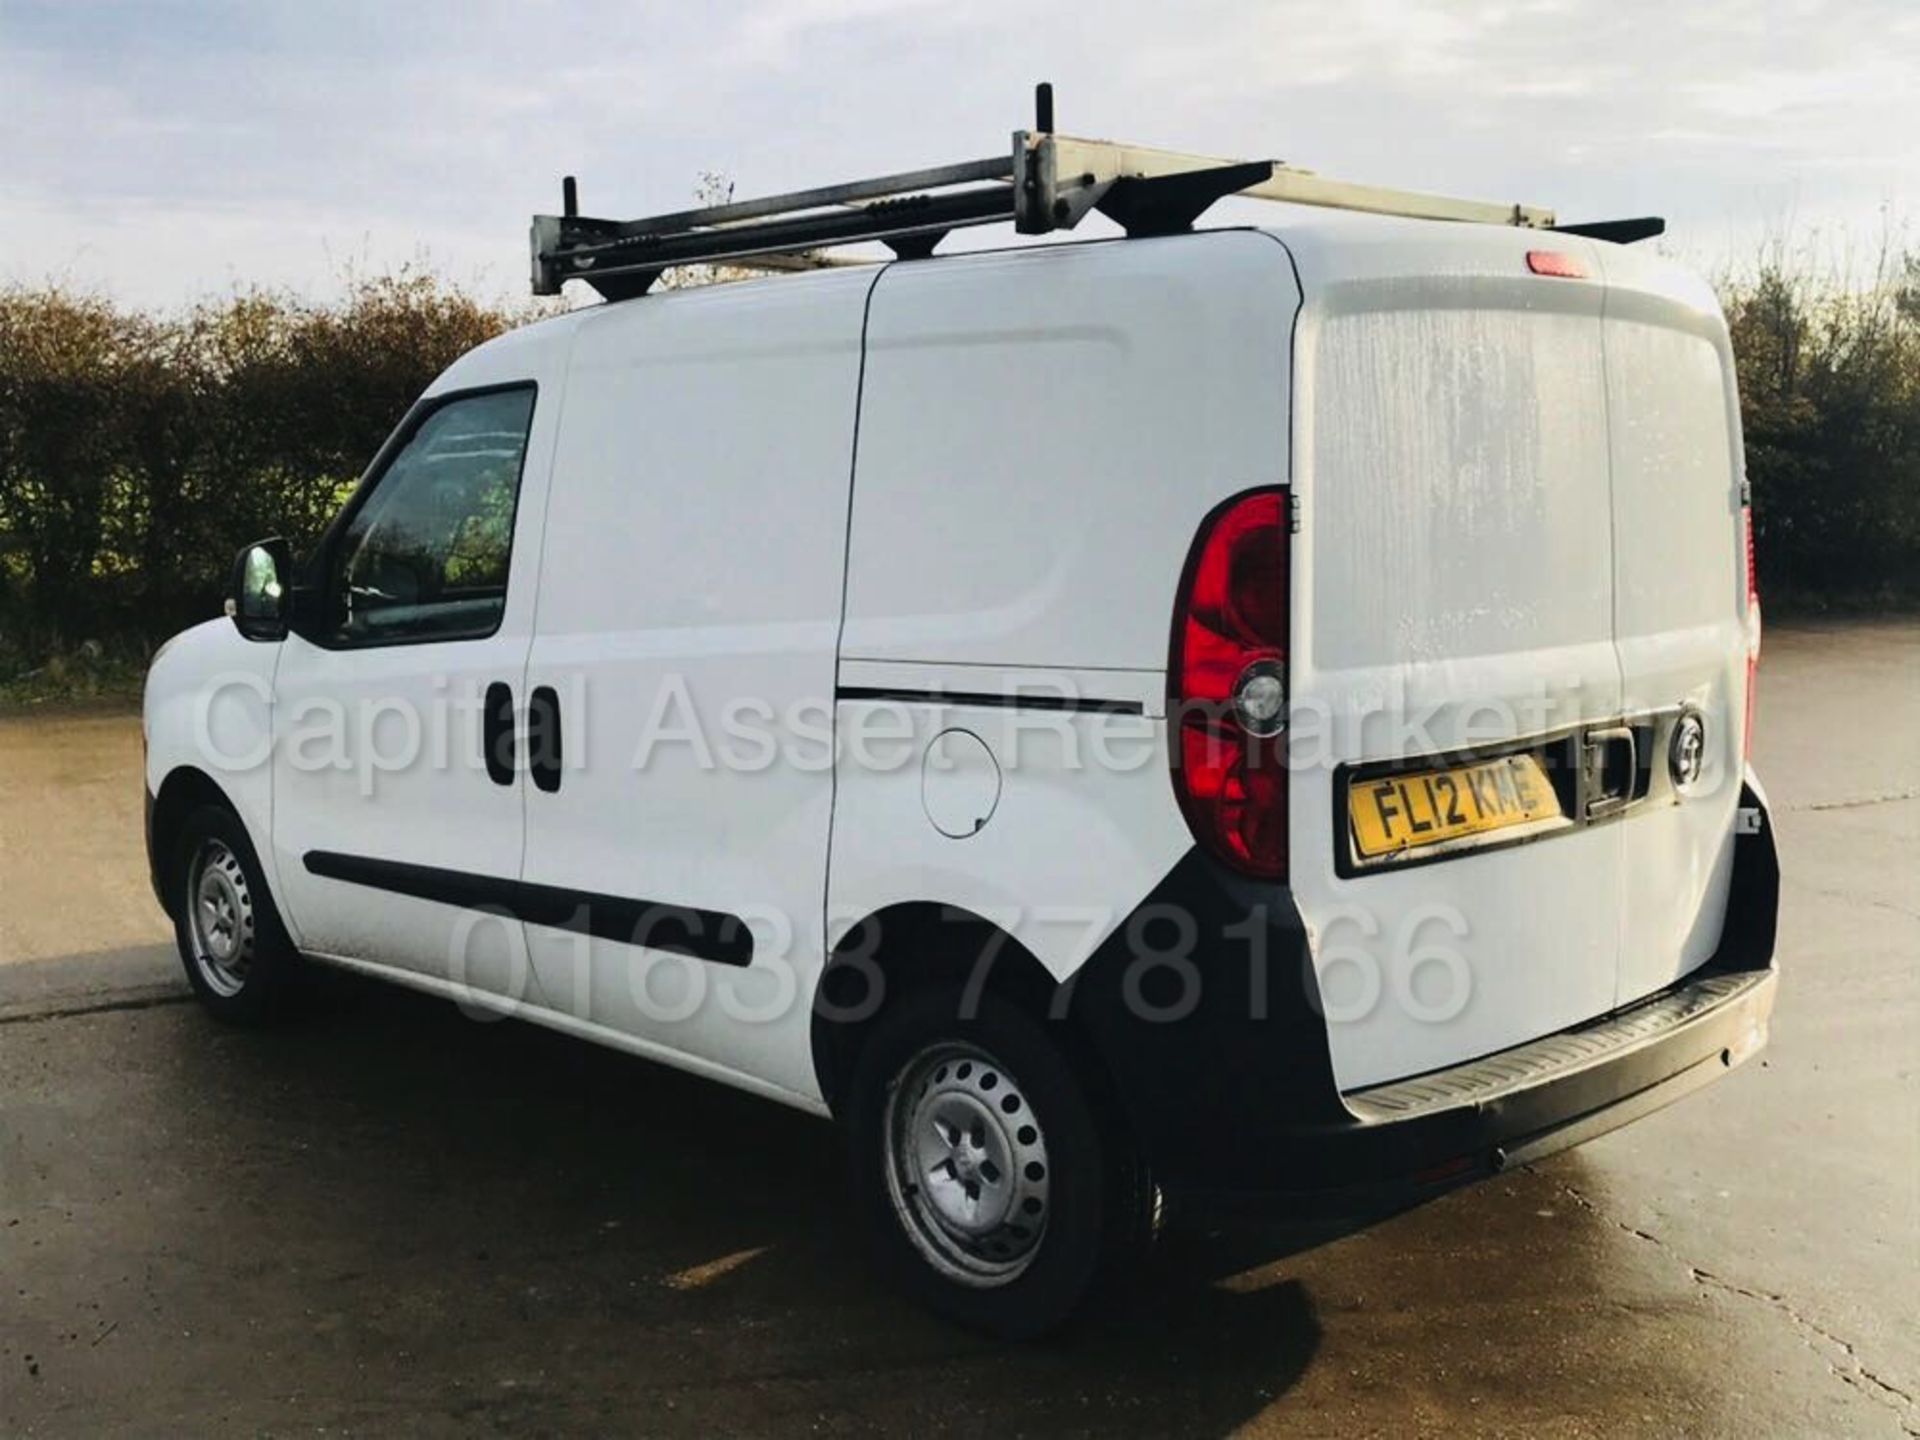 VAUXHALL COMBO 2000 L1H1 (2012 - NEW MODEL) '1.6 CDTI - 105 BHP - STOP / START' (1 OWNER FROM NEW) - Image 3 of 15